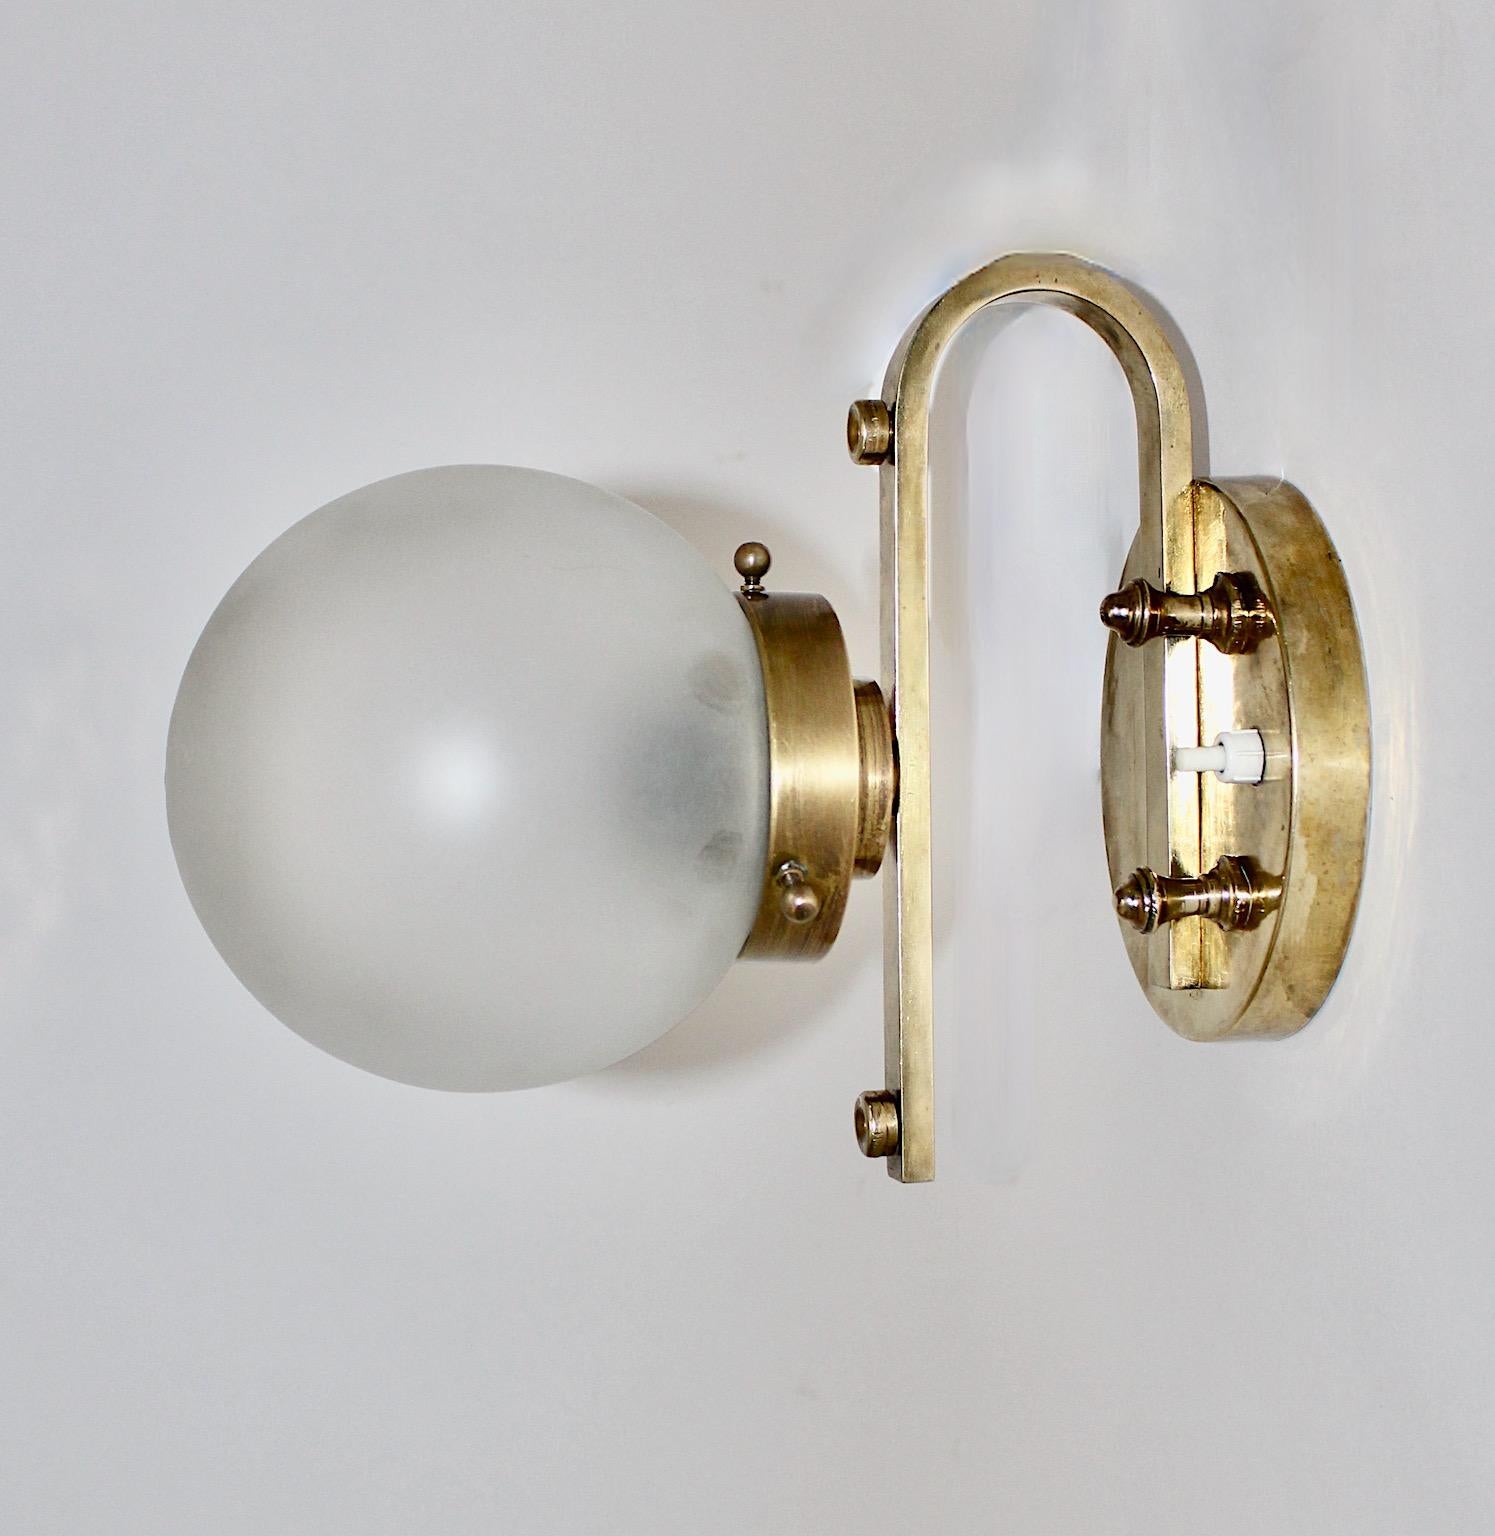 A brass glass vintage Art Deco table lam or sconce, which was designed and made circa 1930, Austria.
The beautiful Art Deco lamp shows a brass base with a frosted milk glass shade, both in very good condition with signs of age and use. Also the